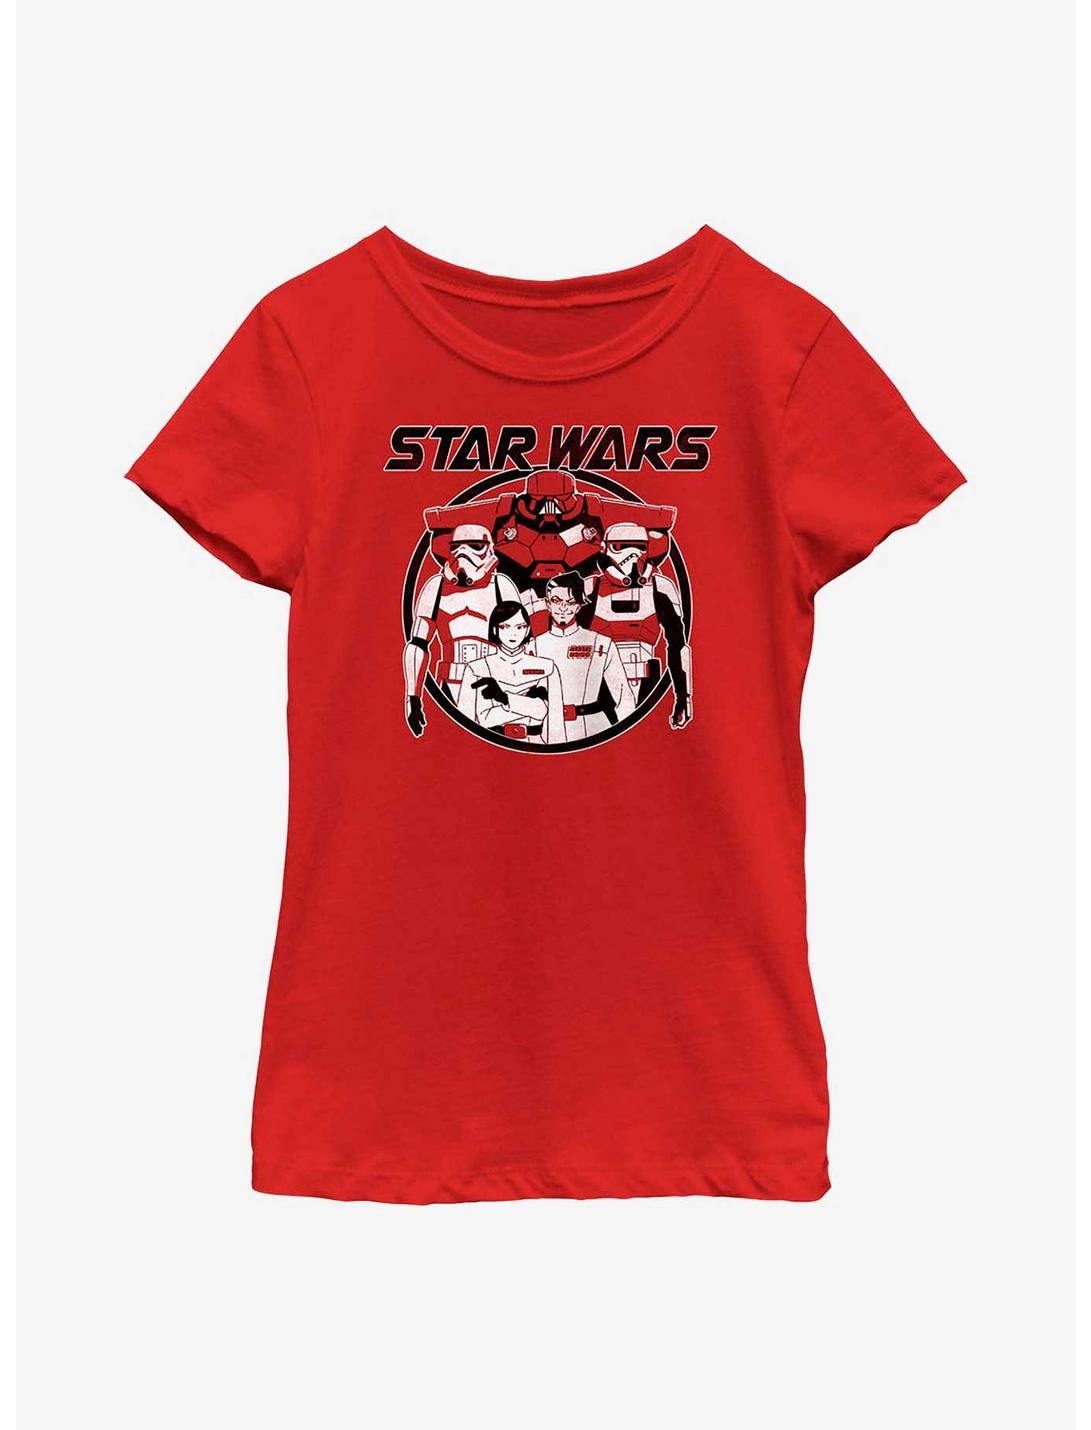 Star Wars: Visions Dark Side Anime Youth Girls T-Shirt, RED, hi-res